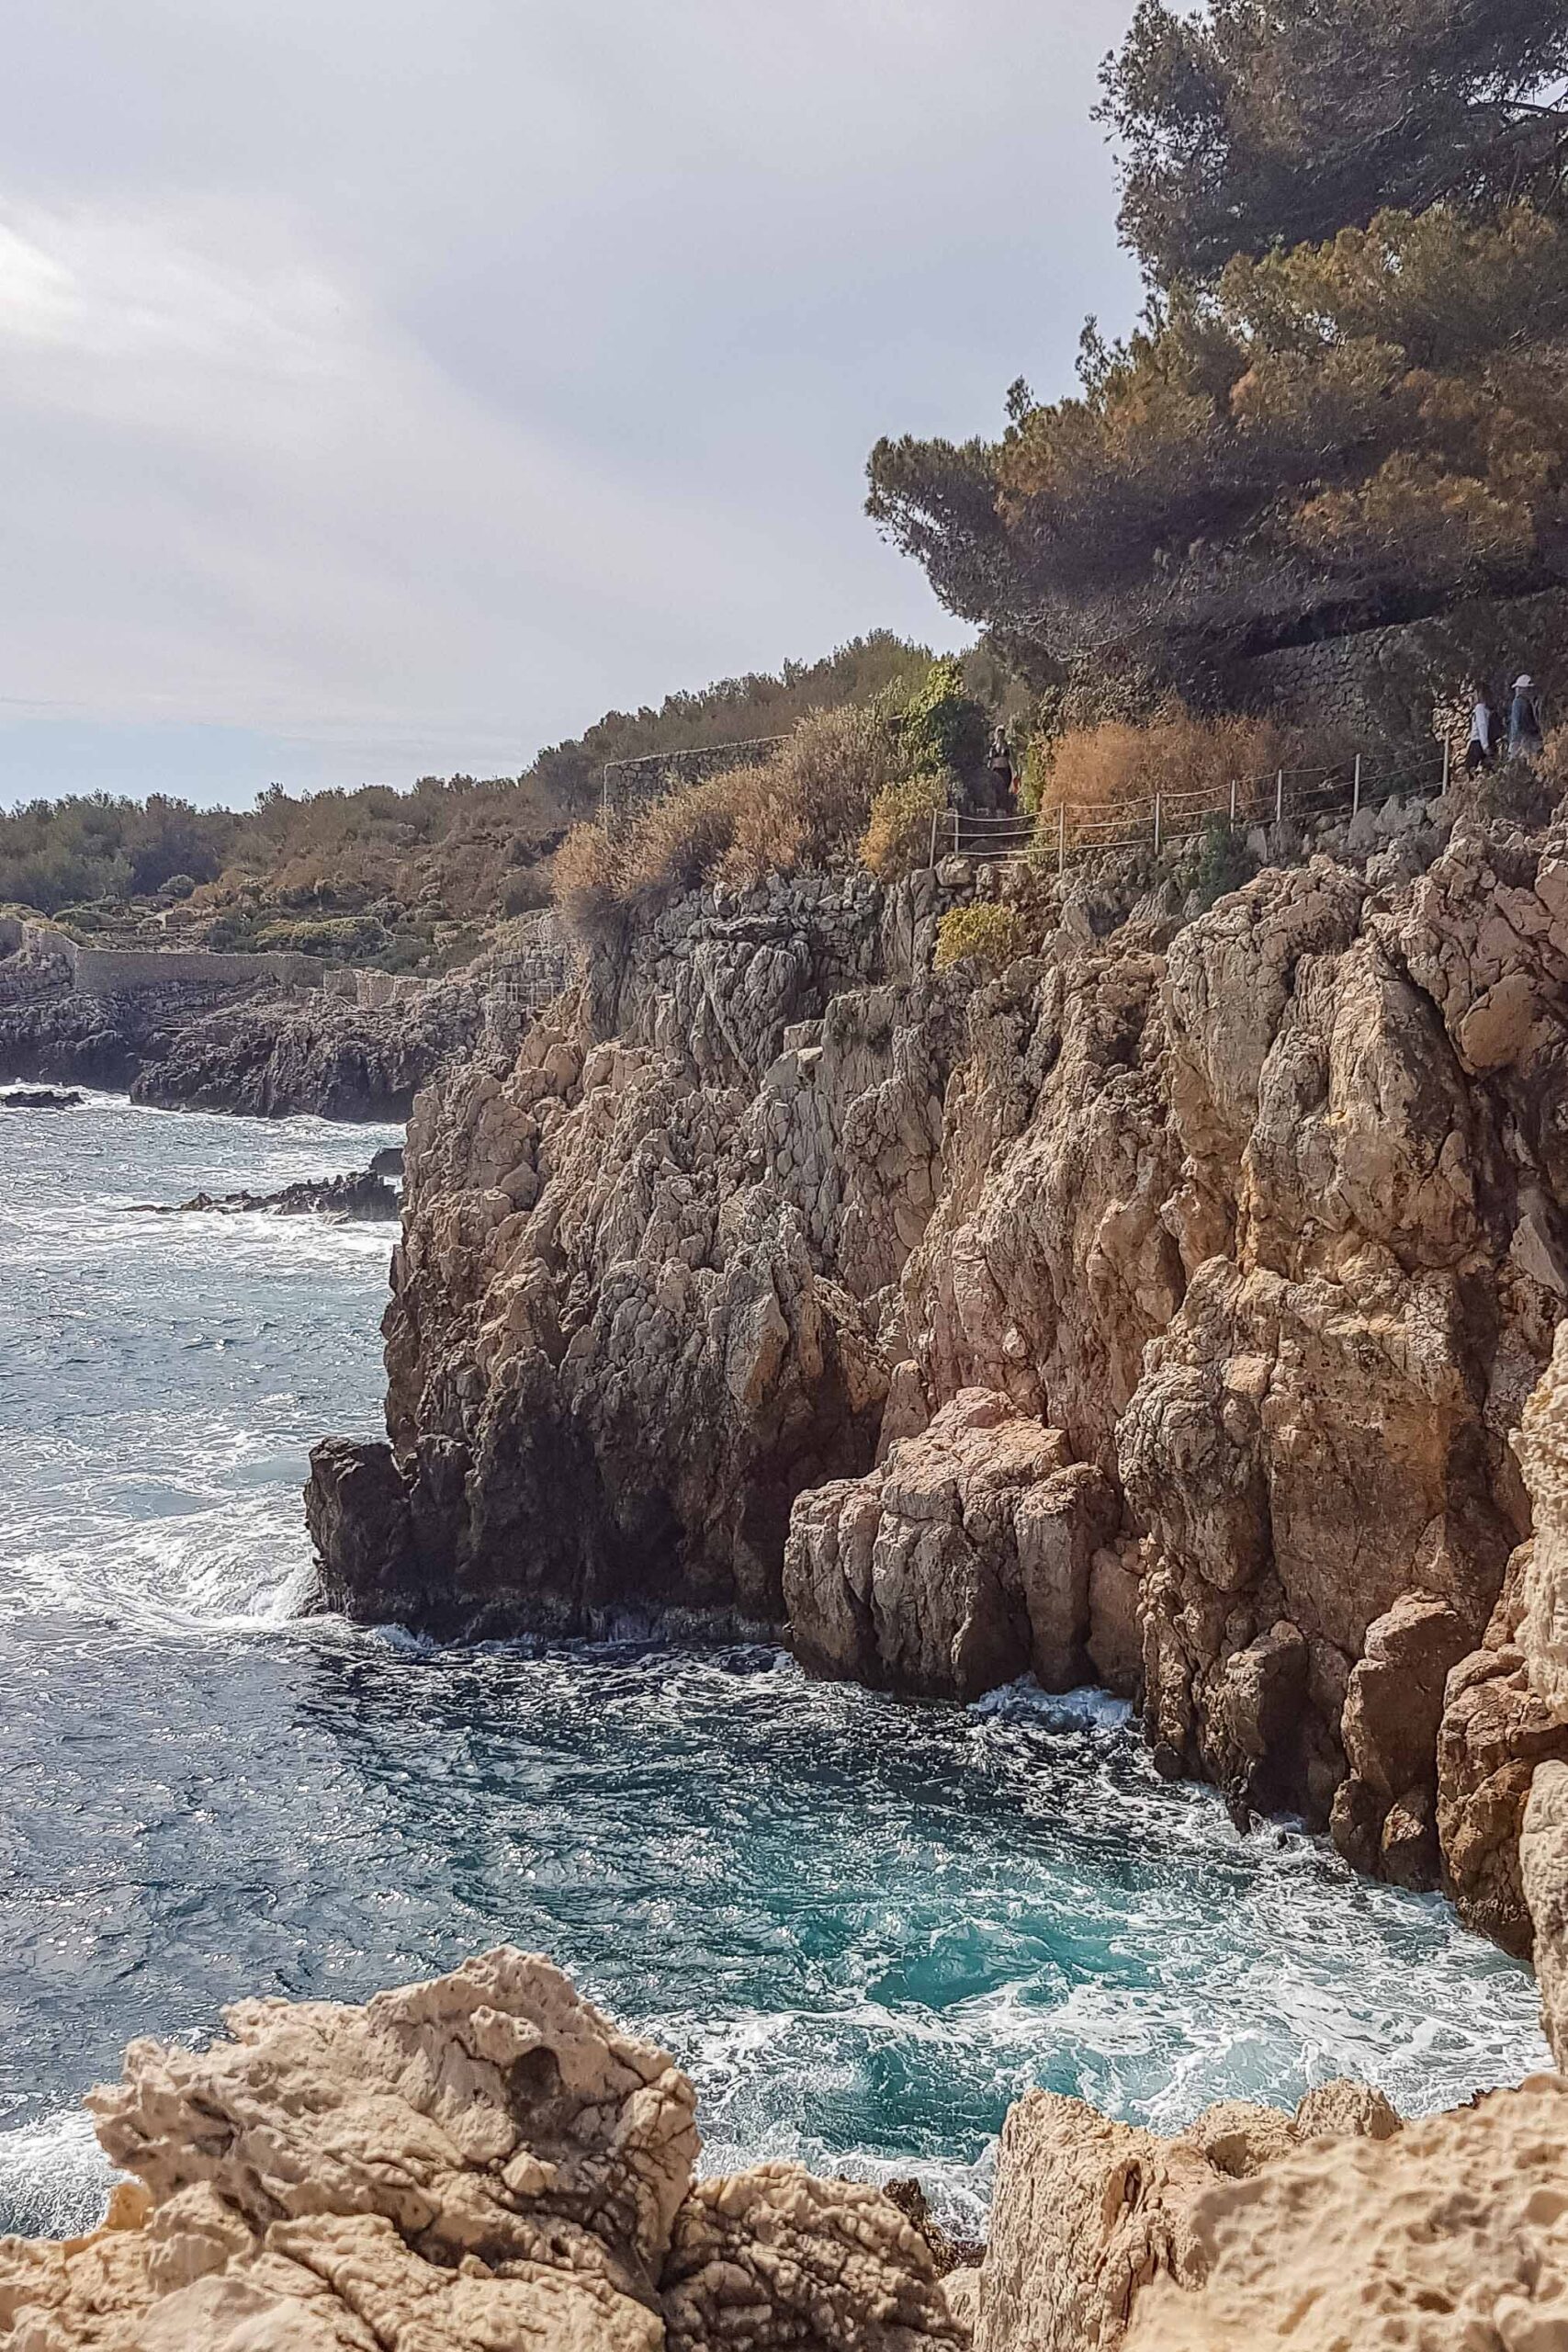 Rock cliffs and blue waves along the Sentier du Littoral hiking trail during a sunny day in Antibes, France